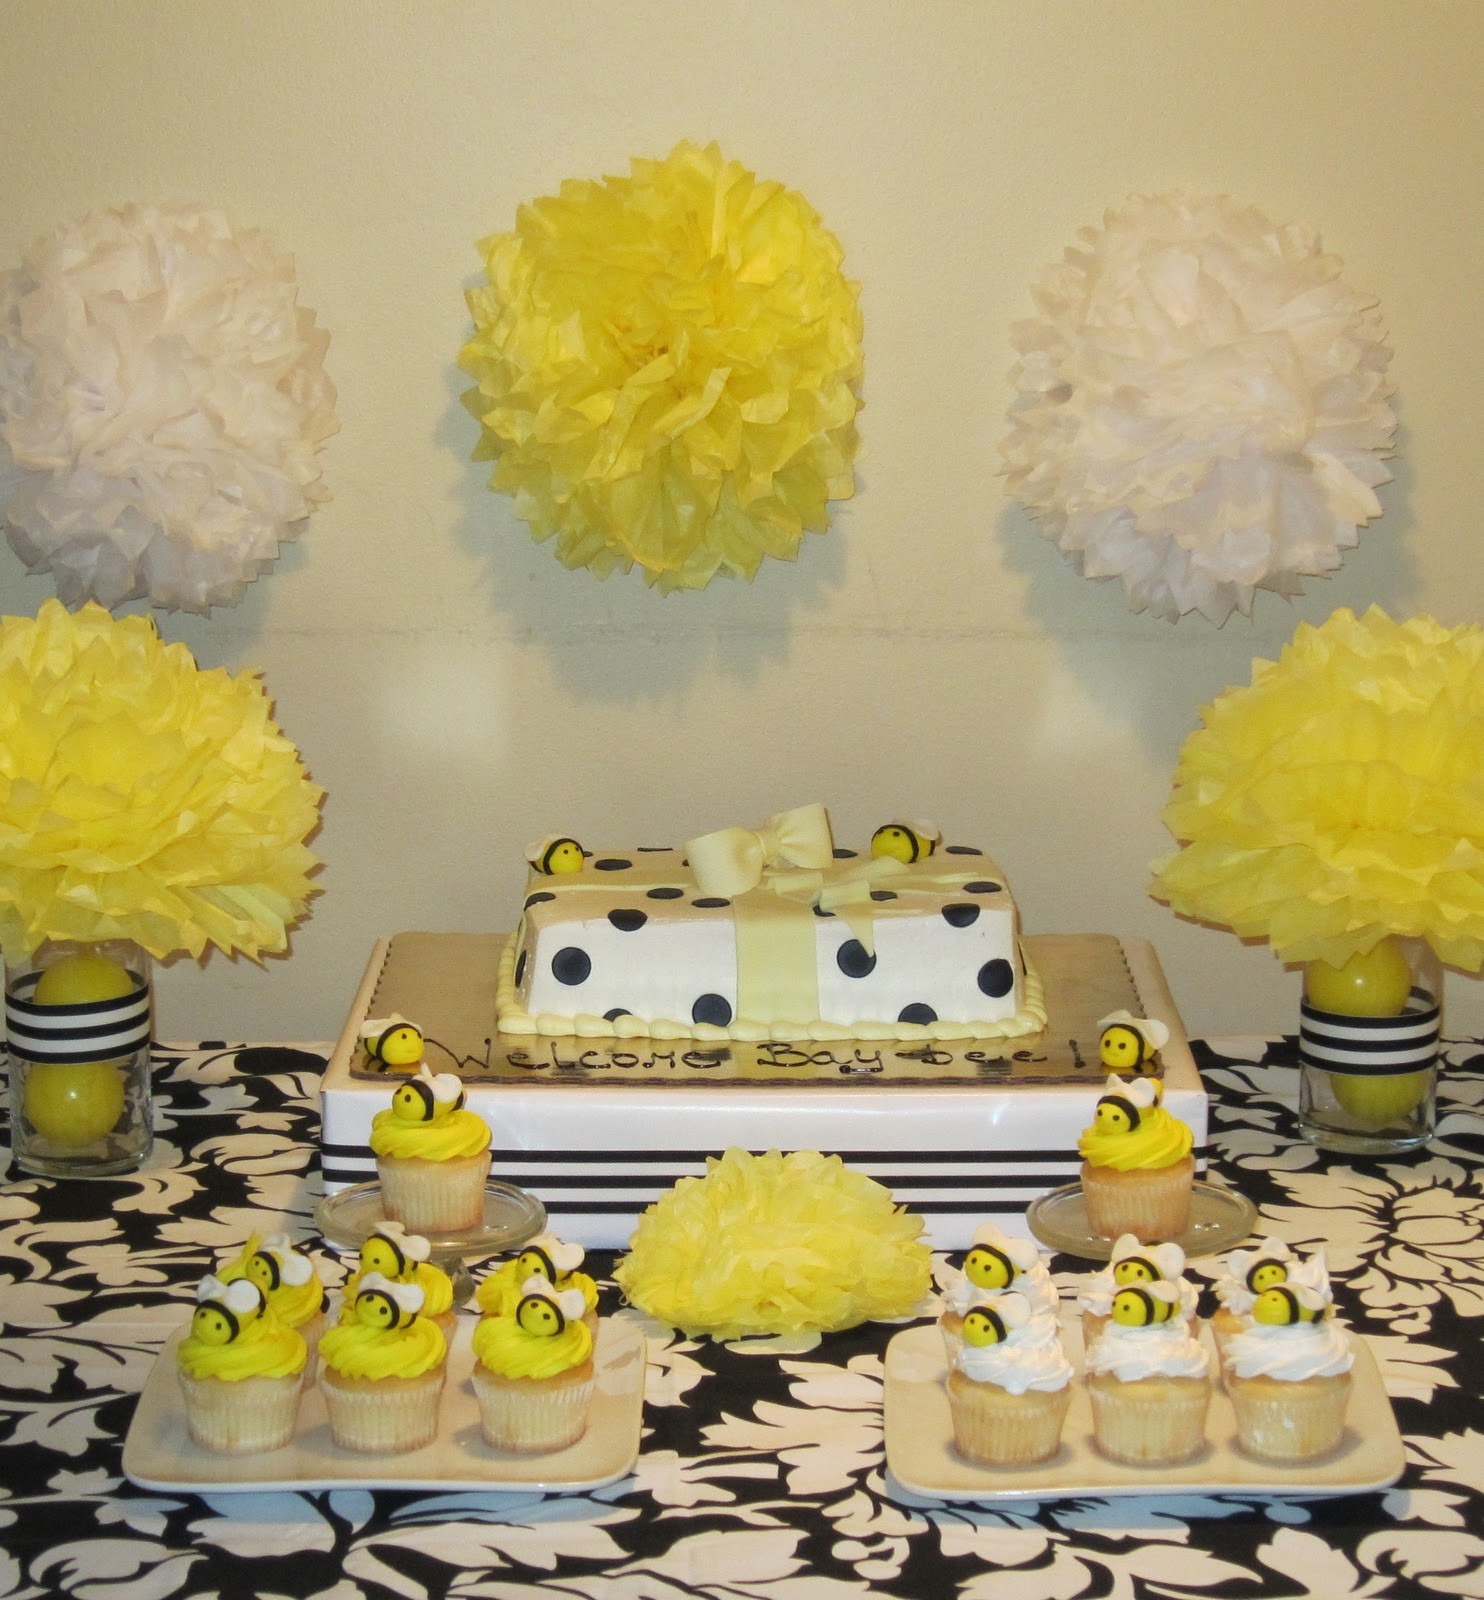 Bumble Bee Baby Shower Decorations Ideas
 SimplyIced Party Details Bumble Bee Baby Shower